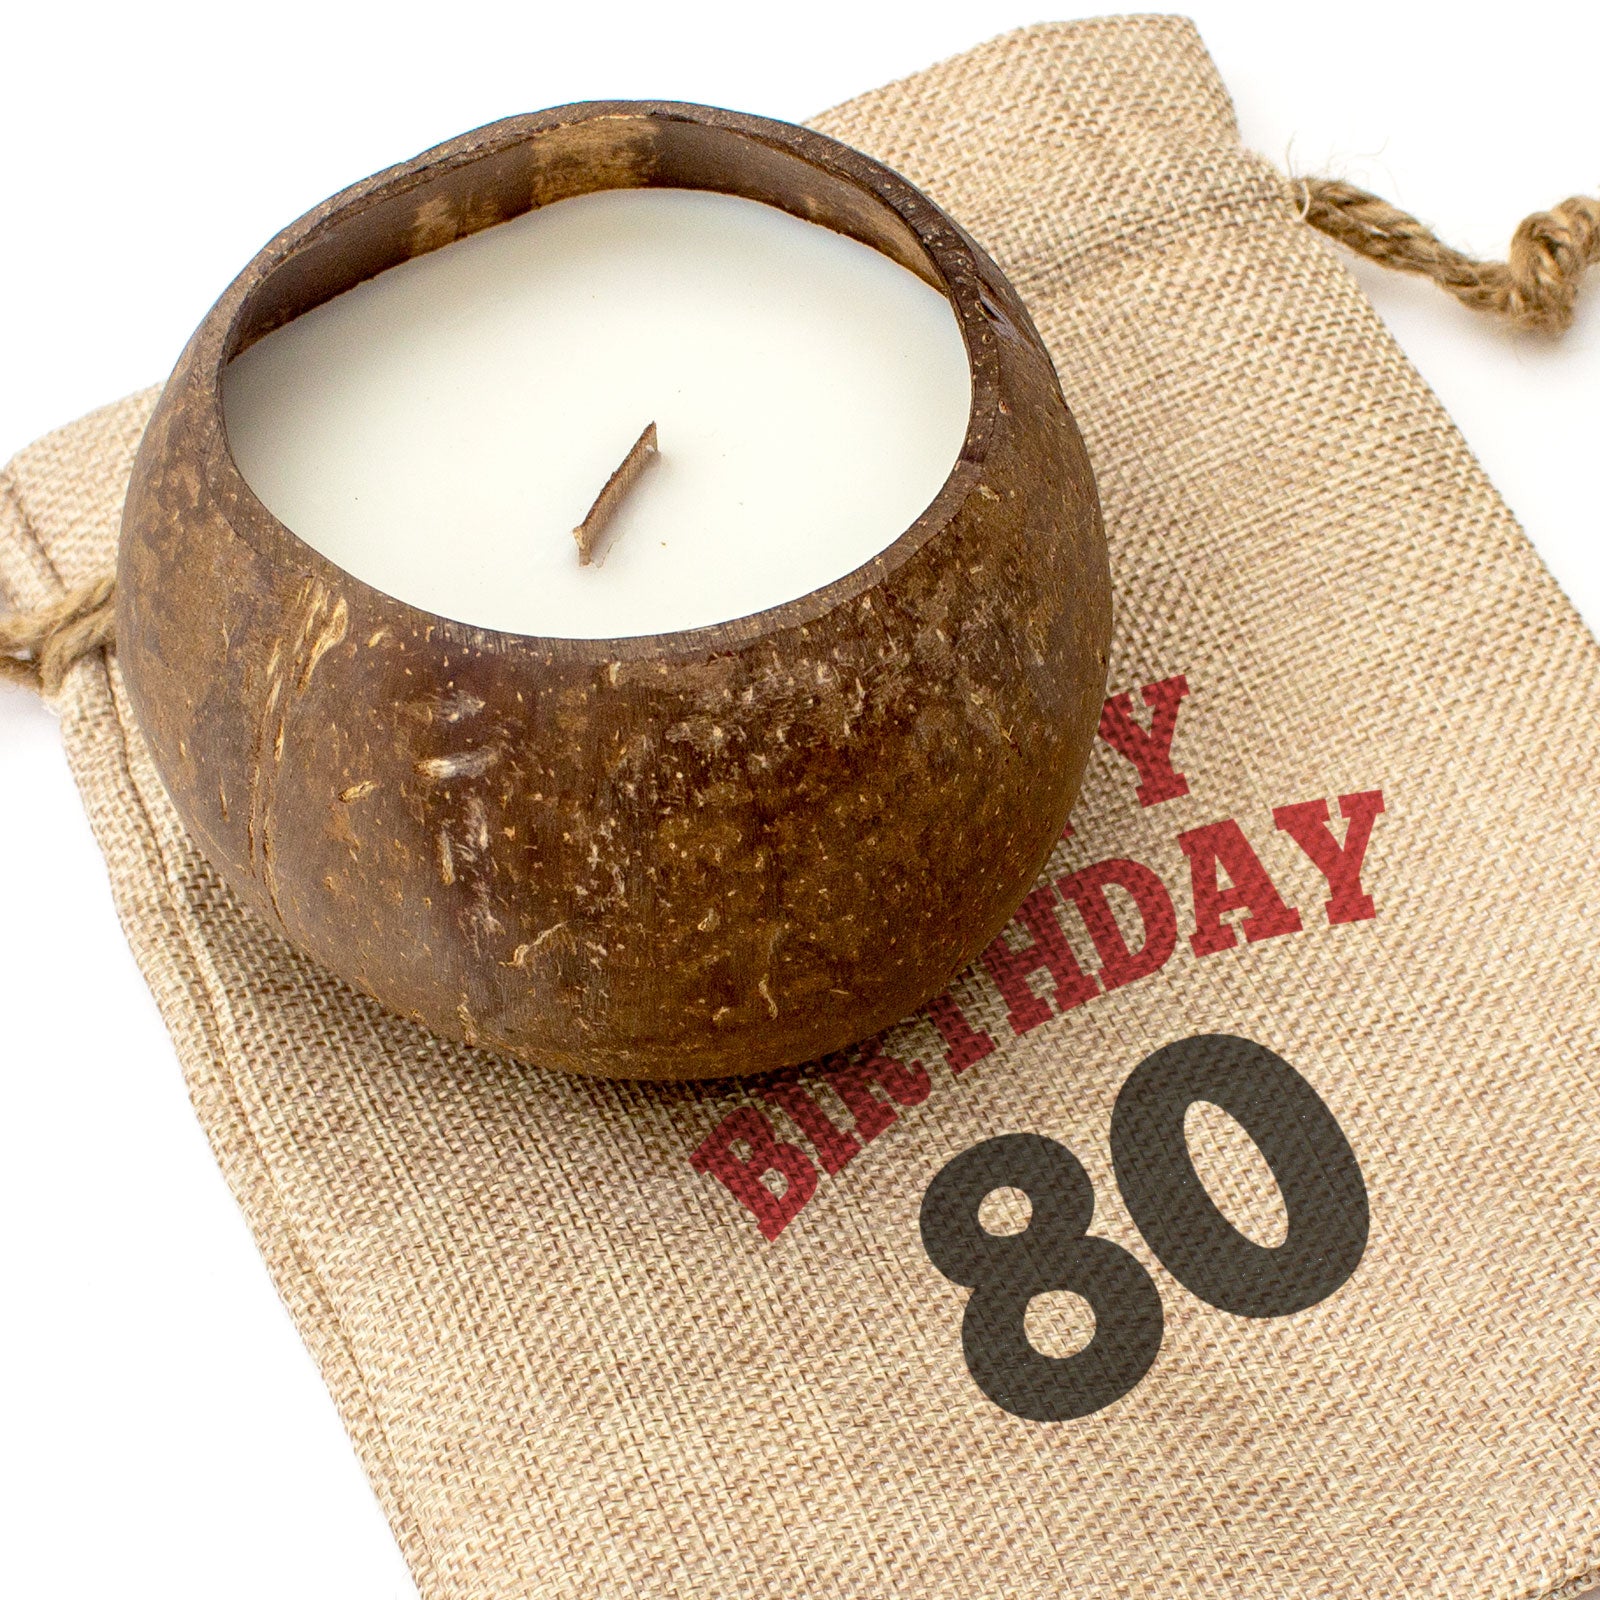 HAPPY BIRTHDAY 80 - Toasted Coconut Bowl Candle – Soy Wax - Gift Present